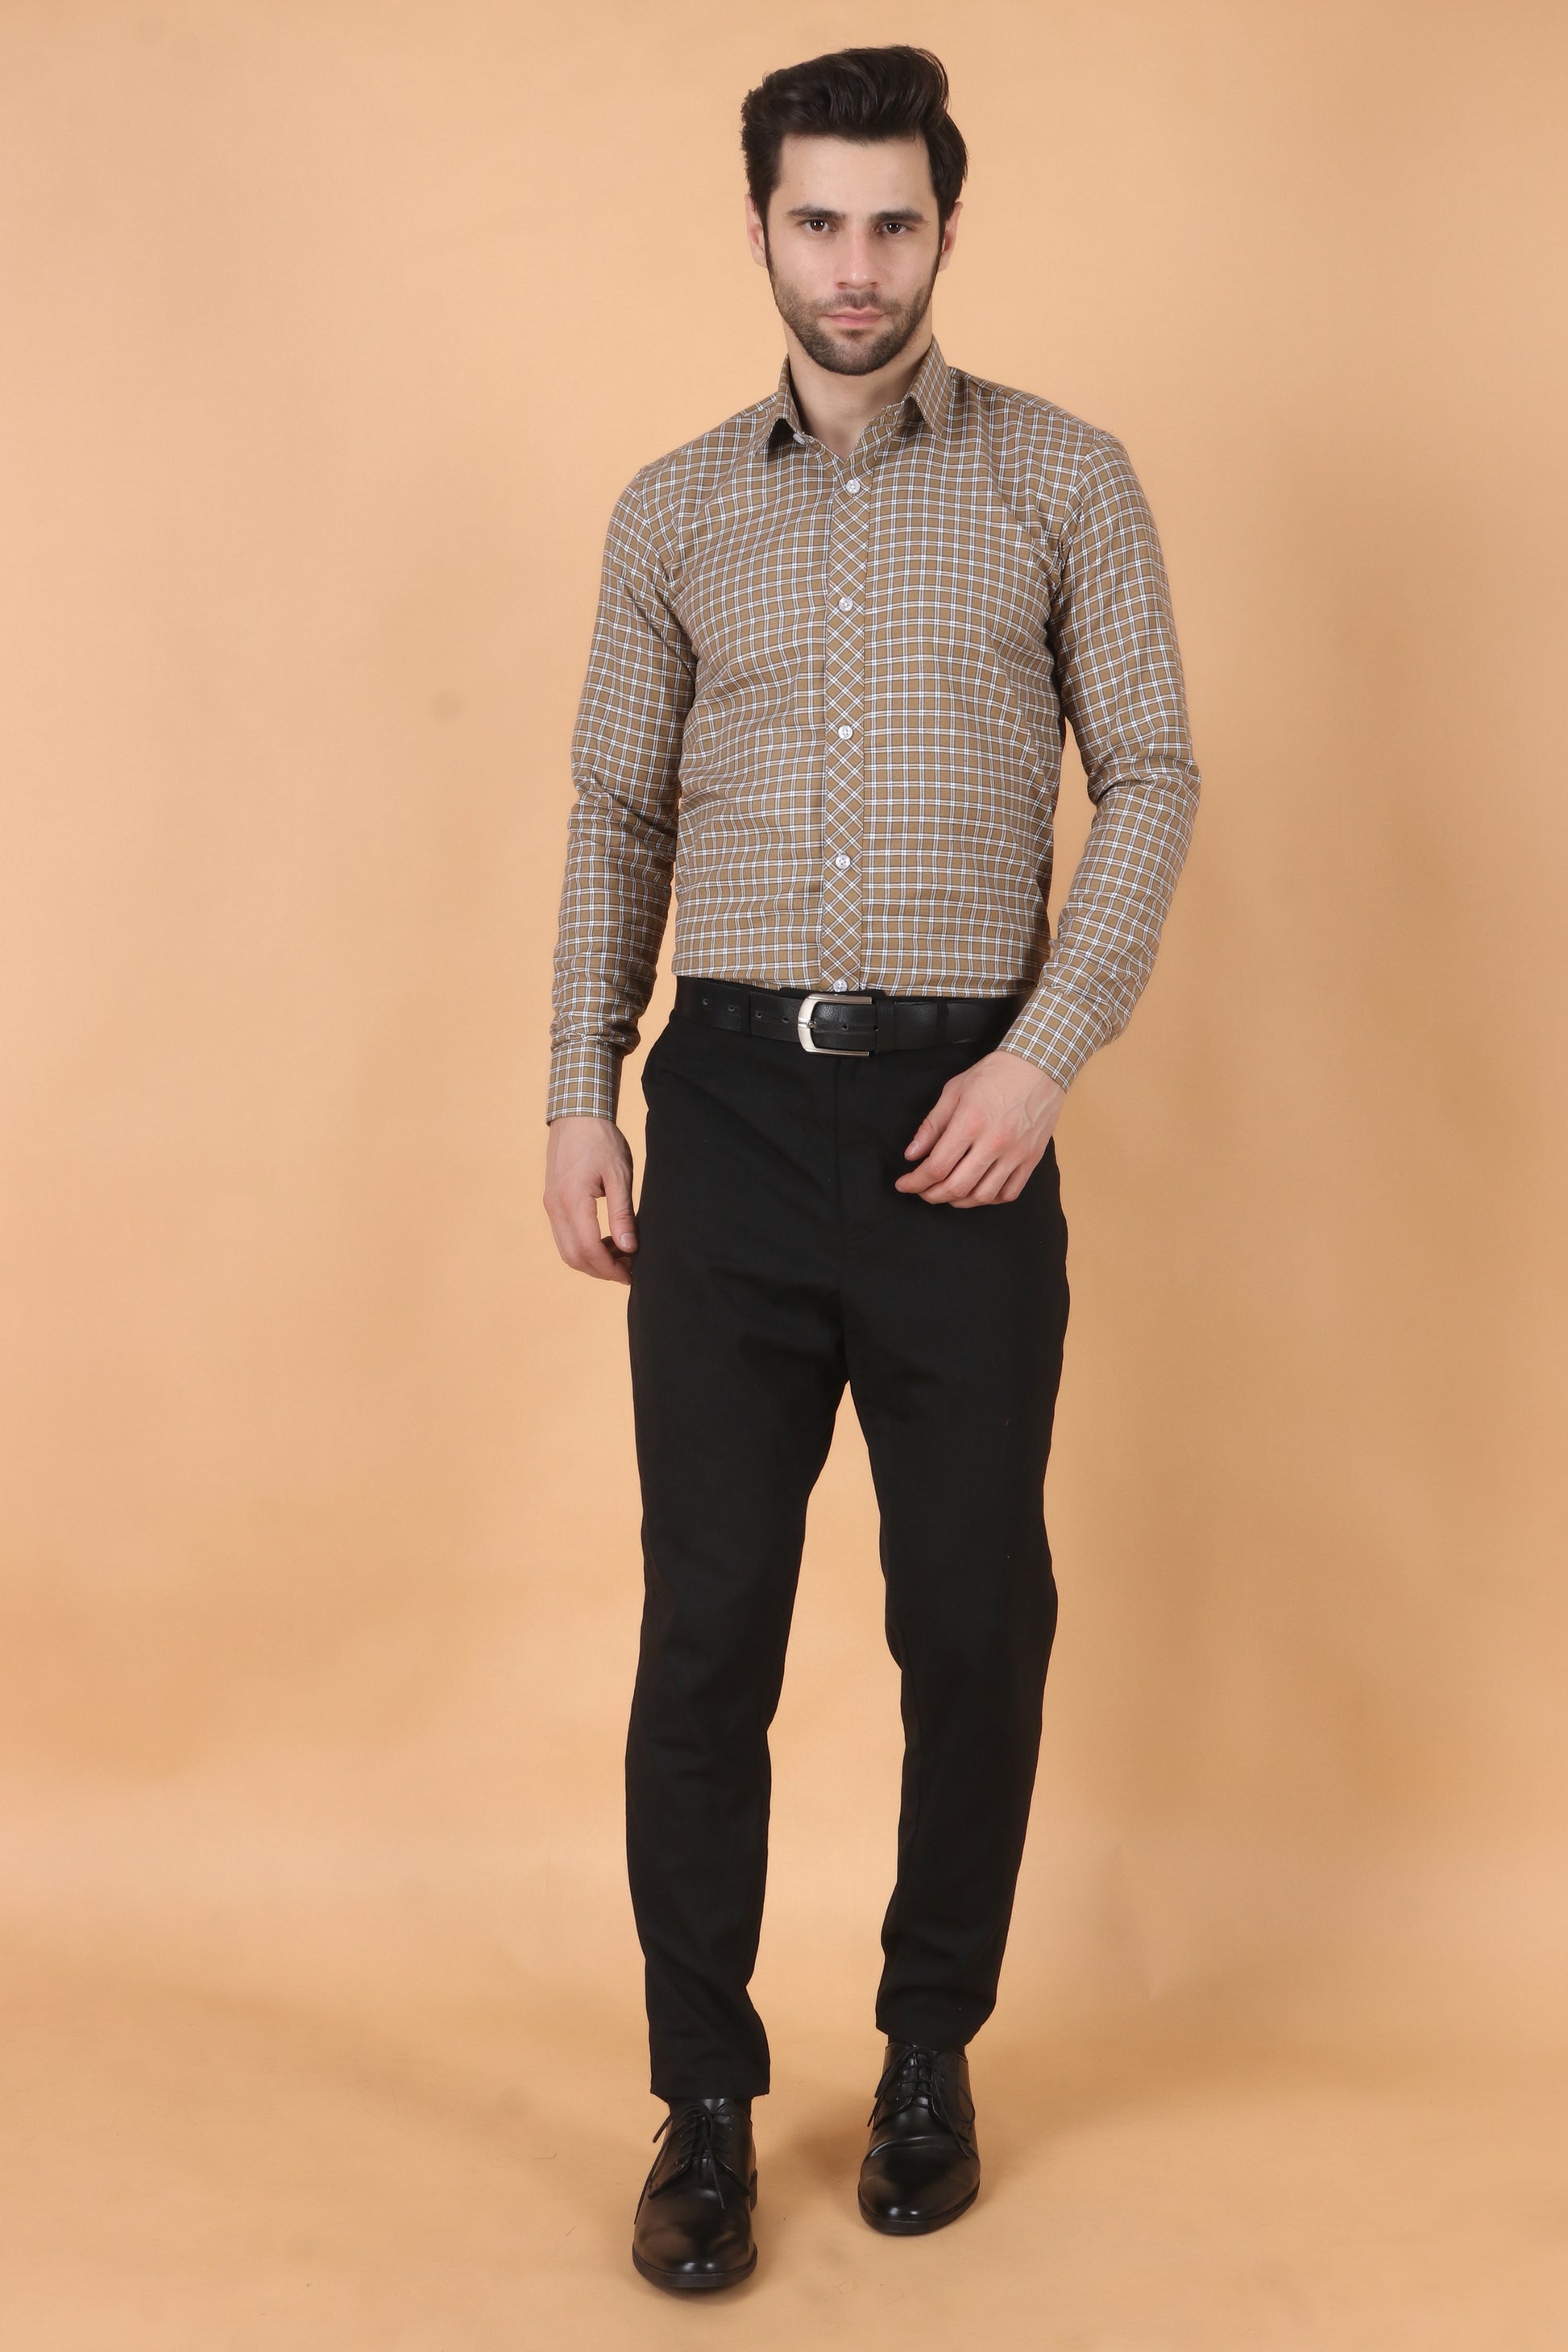 All Size, Brown Cotton Shirt, Caramel Checked Shirt, Caramel Checked Woollen Shirt, Checked Shirt, Collar Neckline, Cotton Checked Shirt, Cotton Shirt, Cotton Twill, Full Sleeves, Light Brown